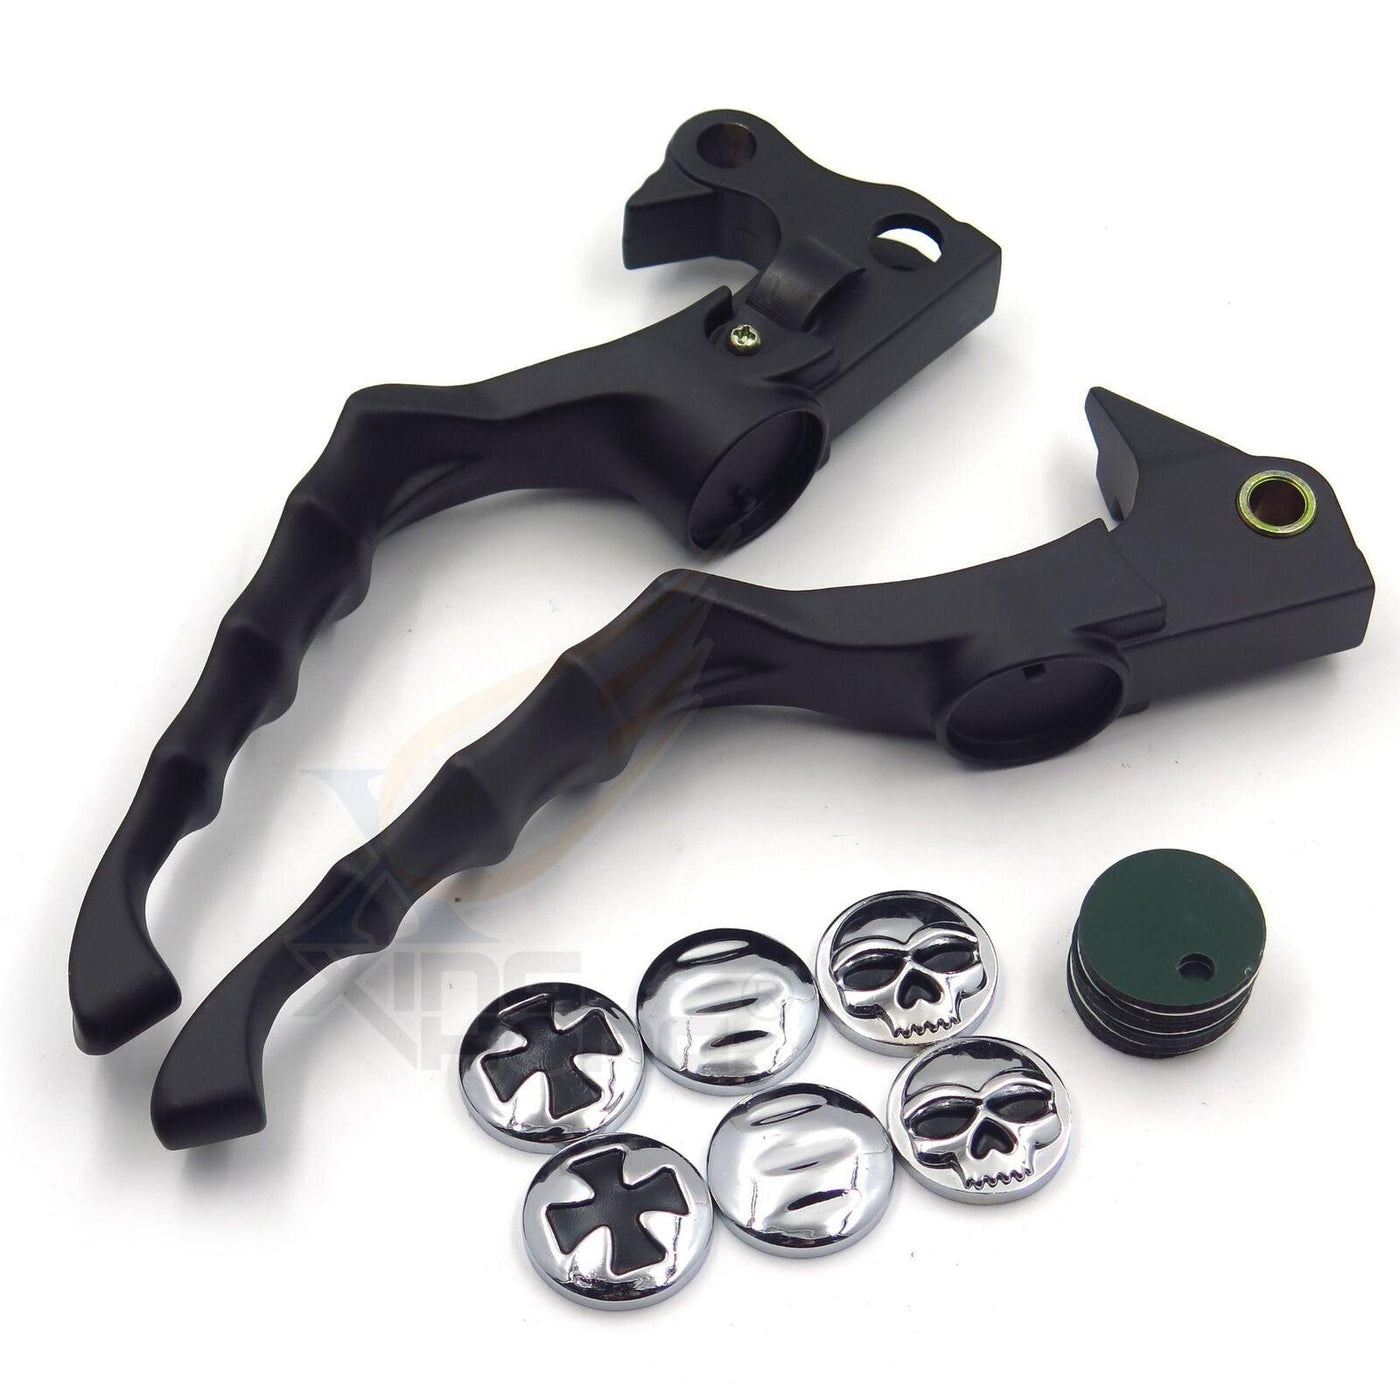 Black Parts Brake Clutch Hand Lever For Street Glides Road Kings - Moto Life Products